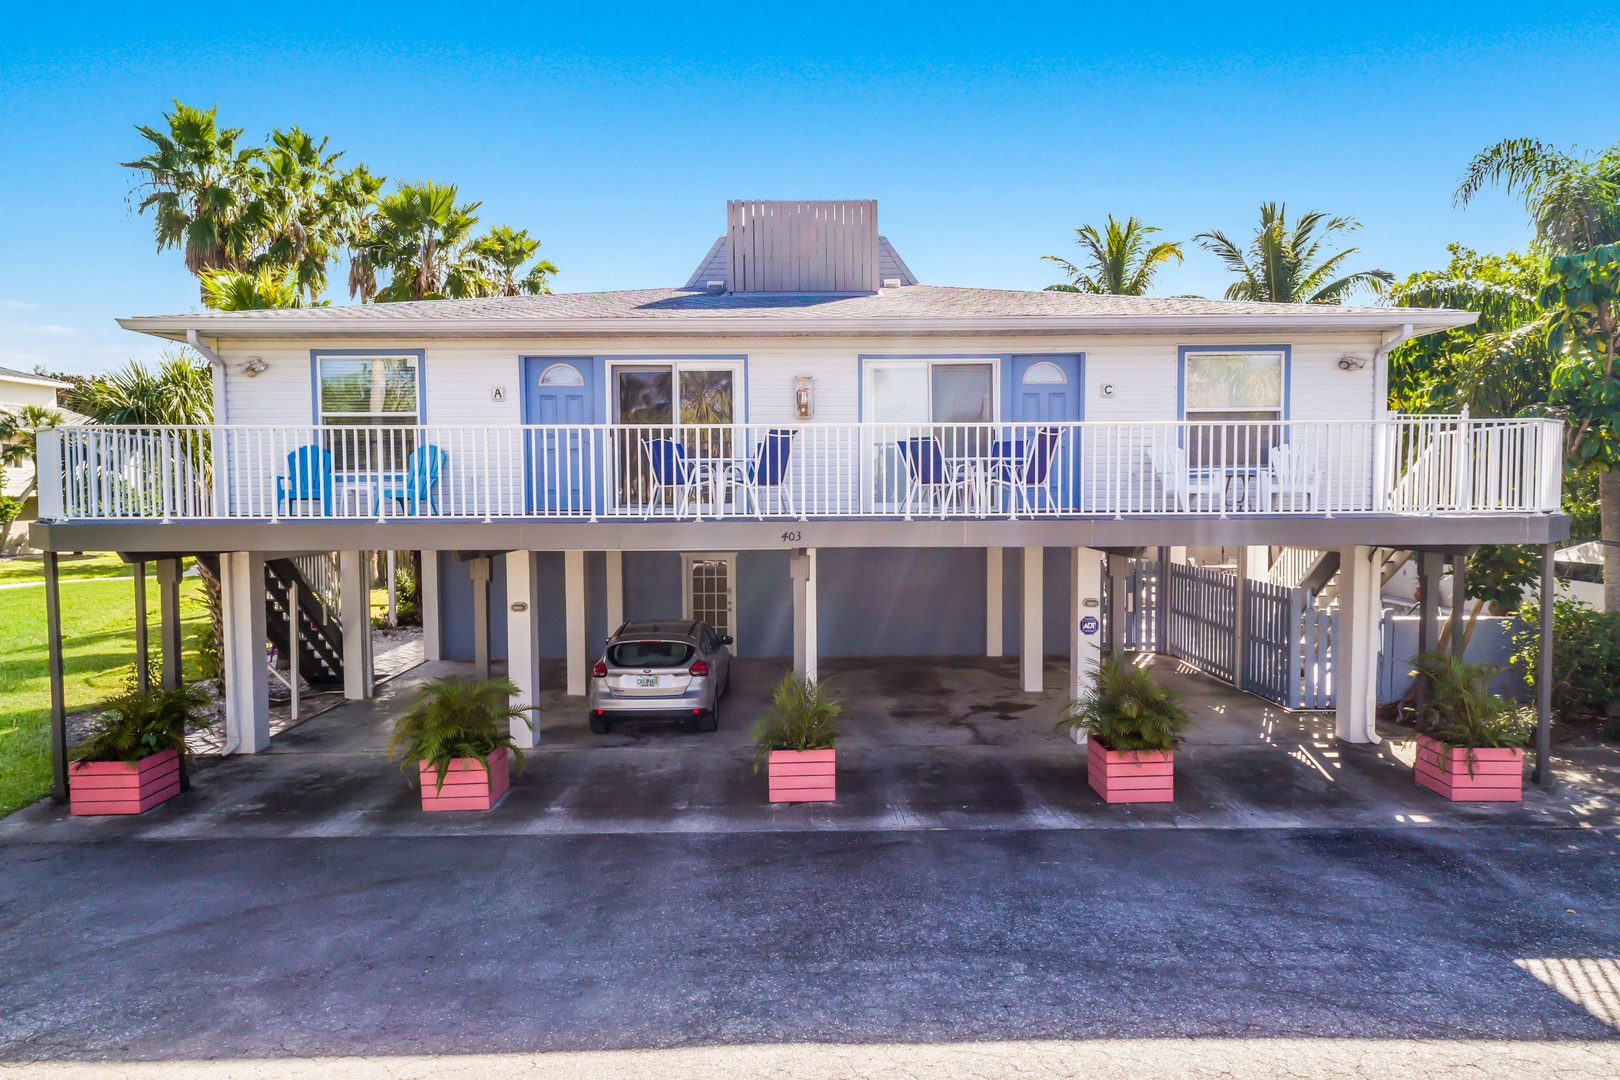 Seabreeze A - By Anna Maria Island Accommodations